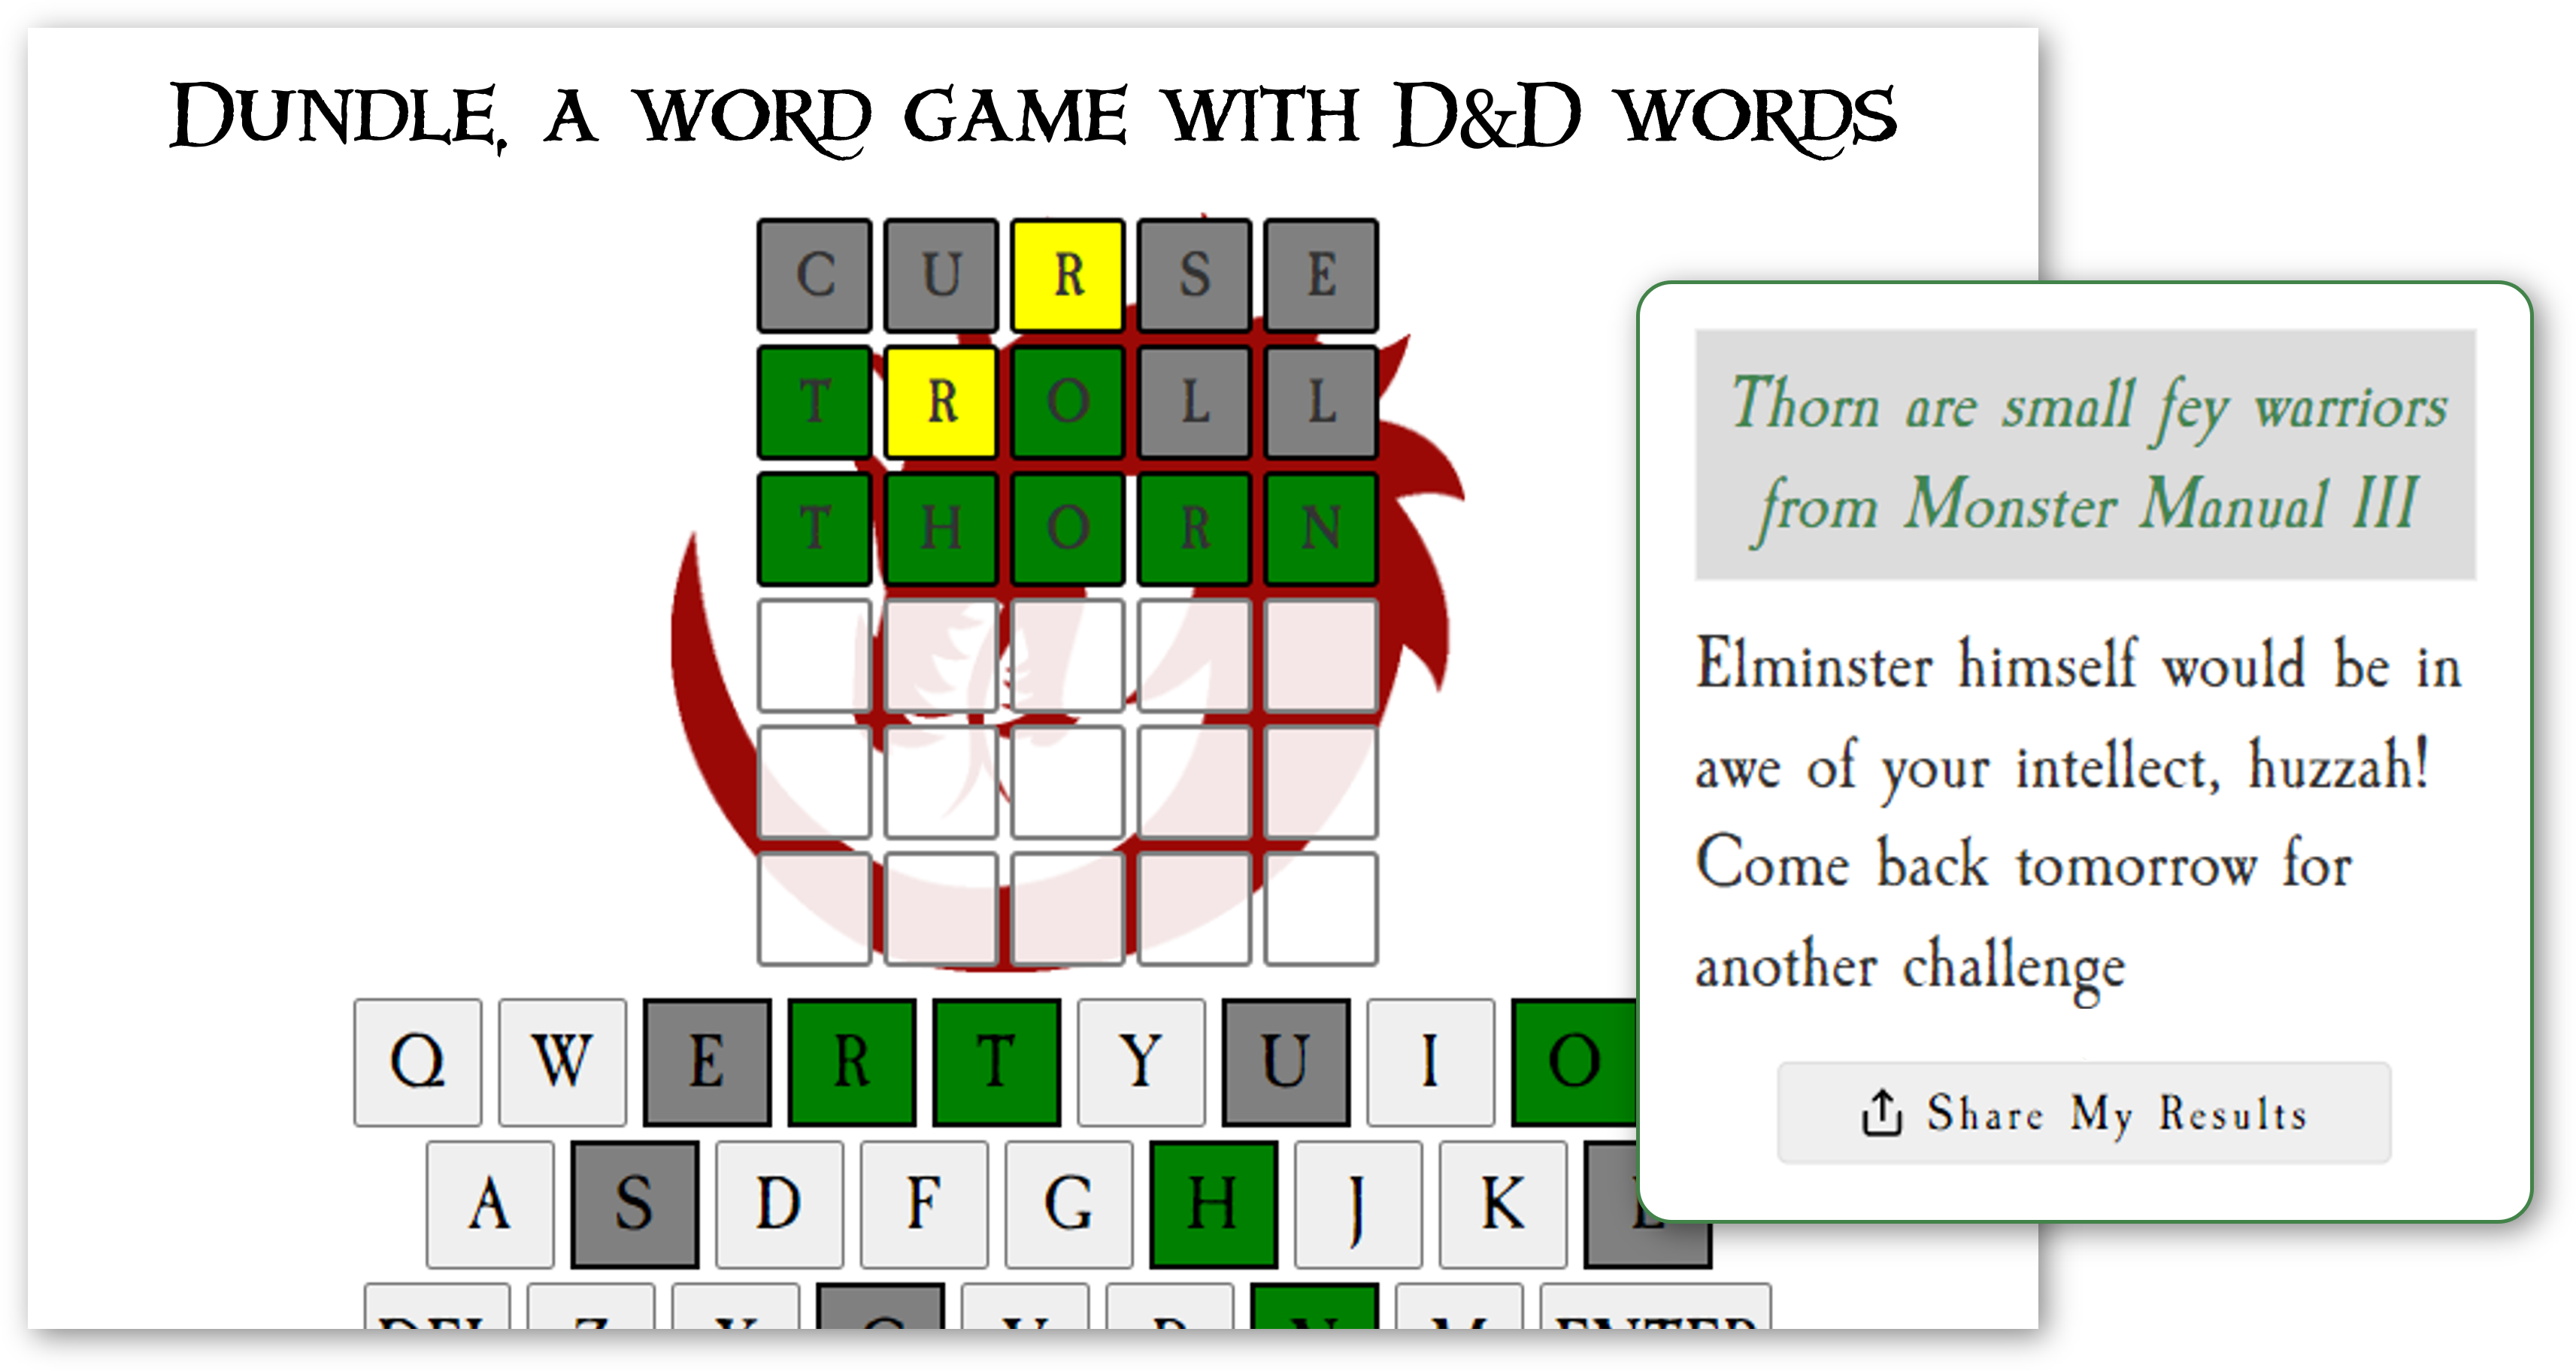 Dundle-DnD-Word-Game.png